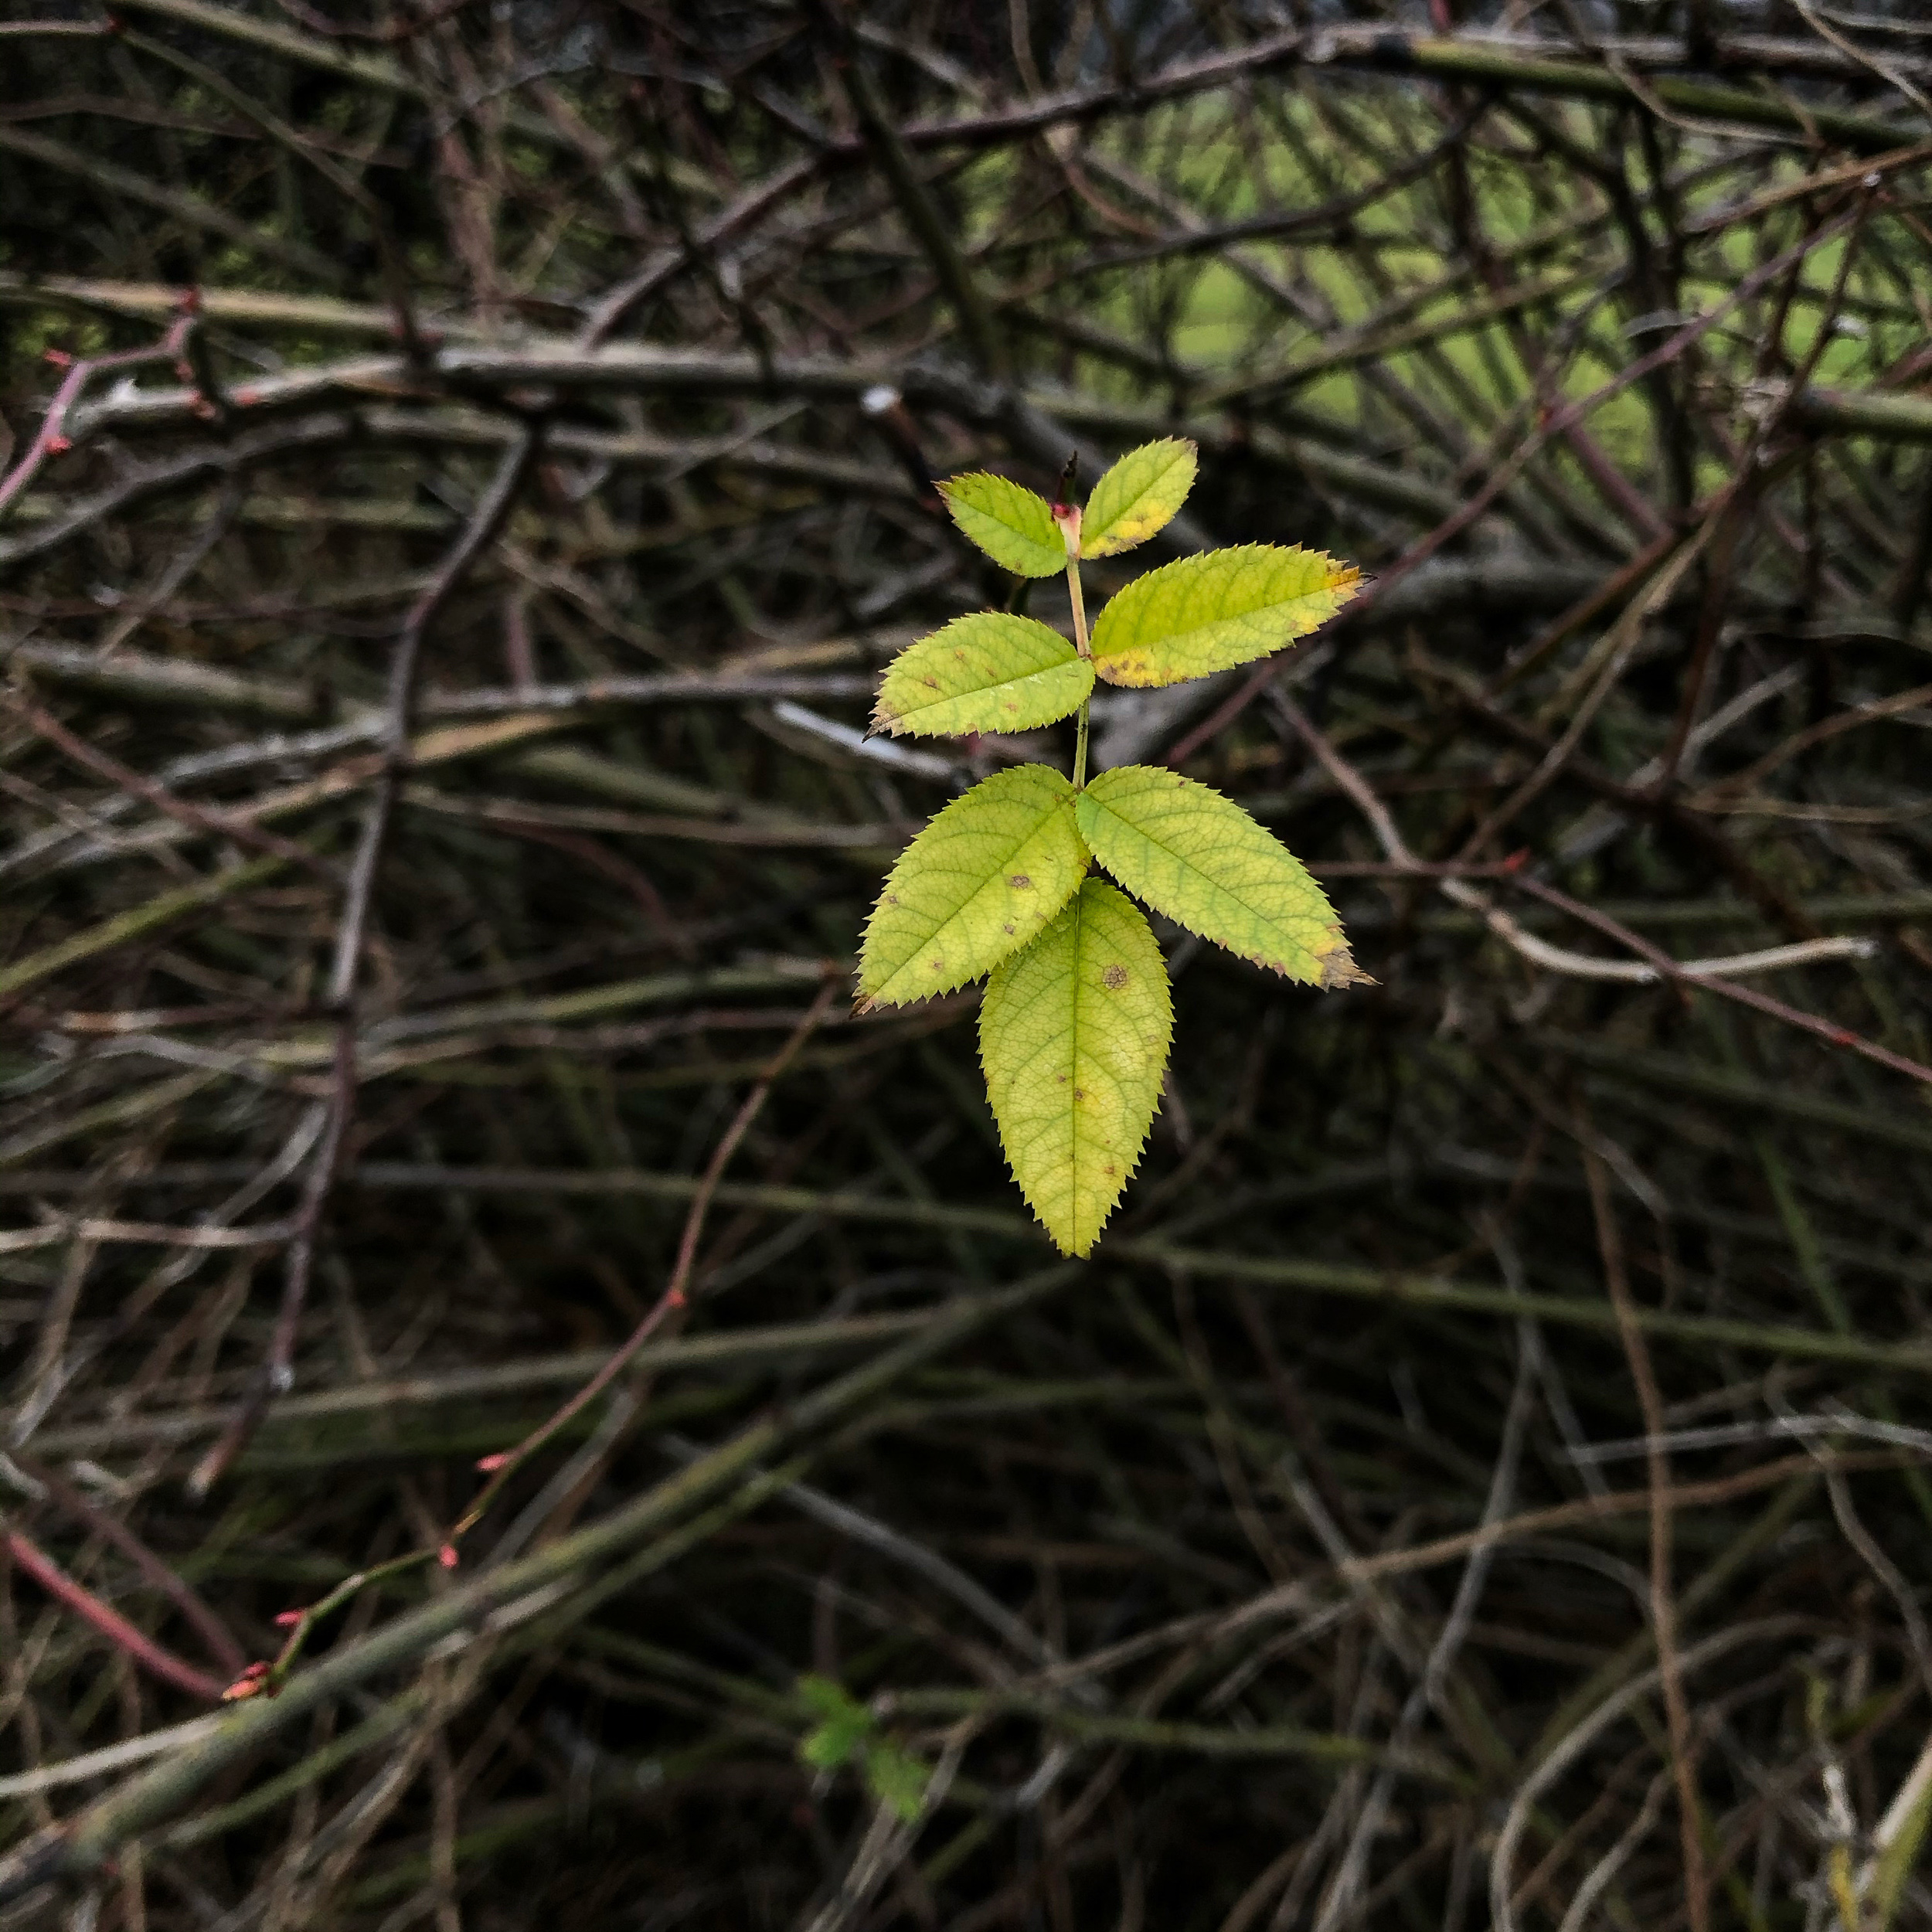 Remaining leaves